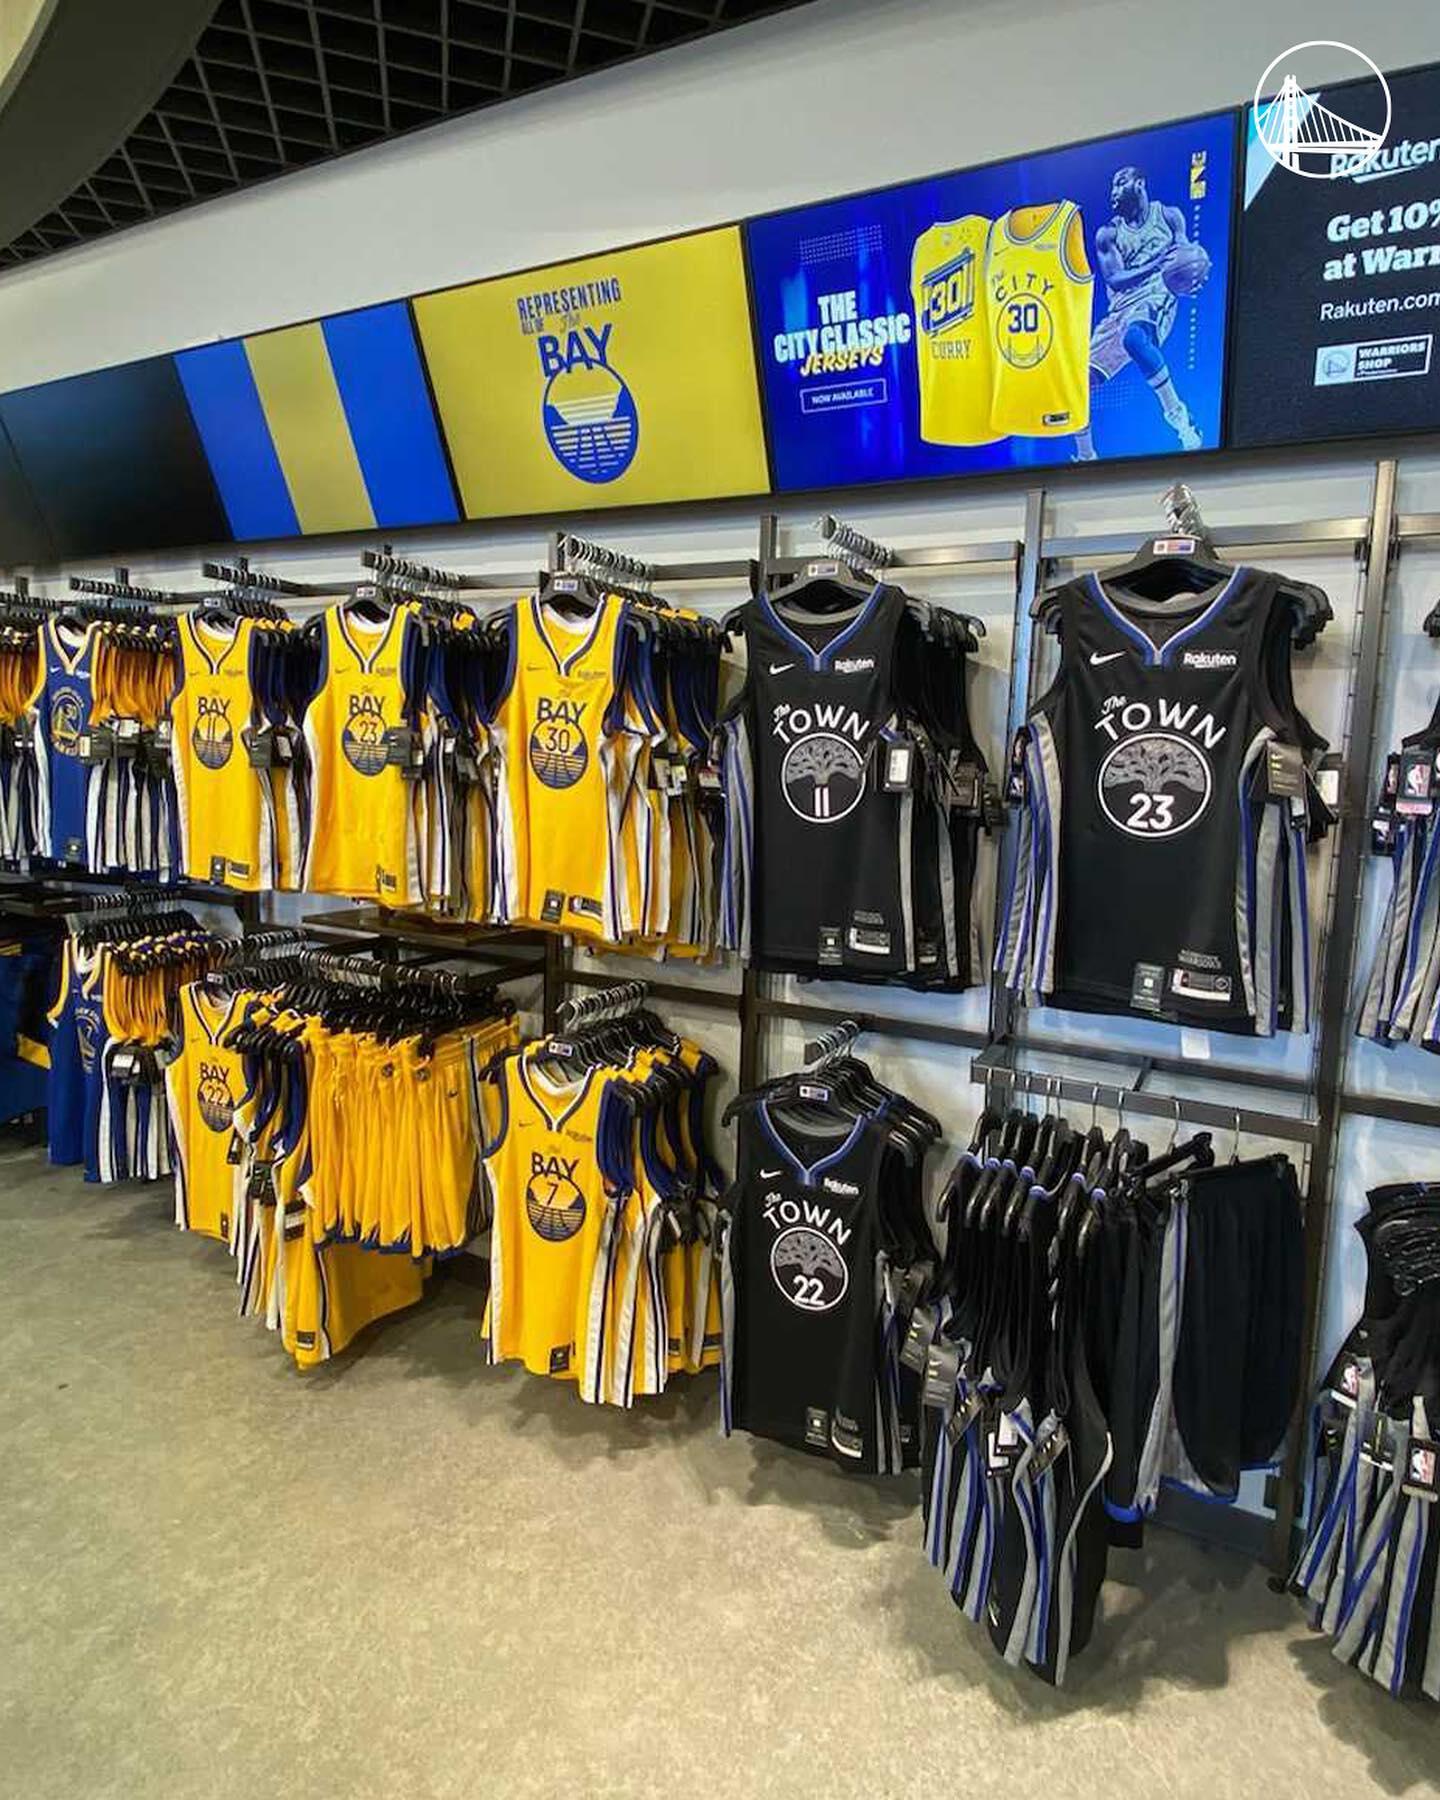 golden state warriors team store locations